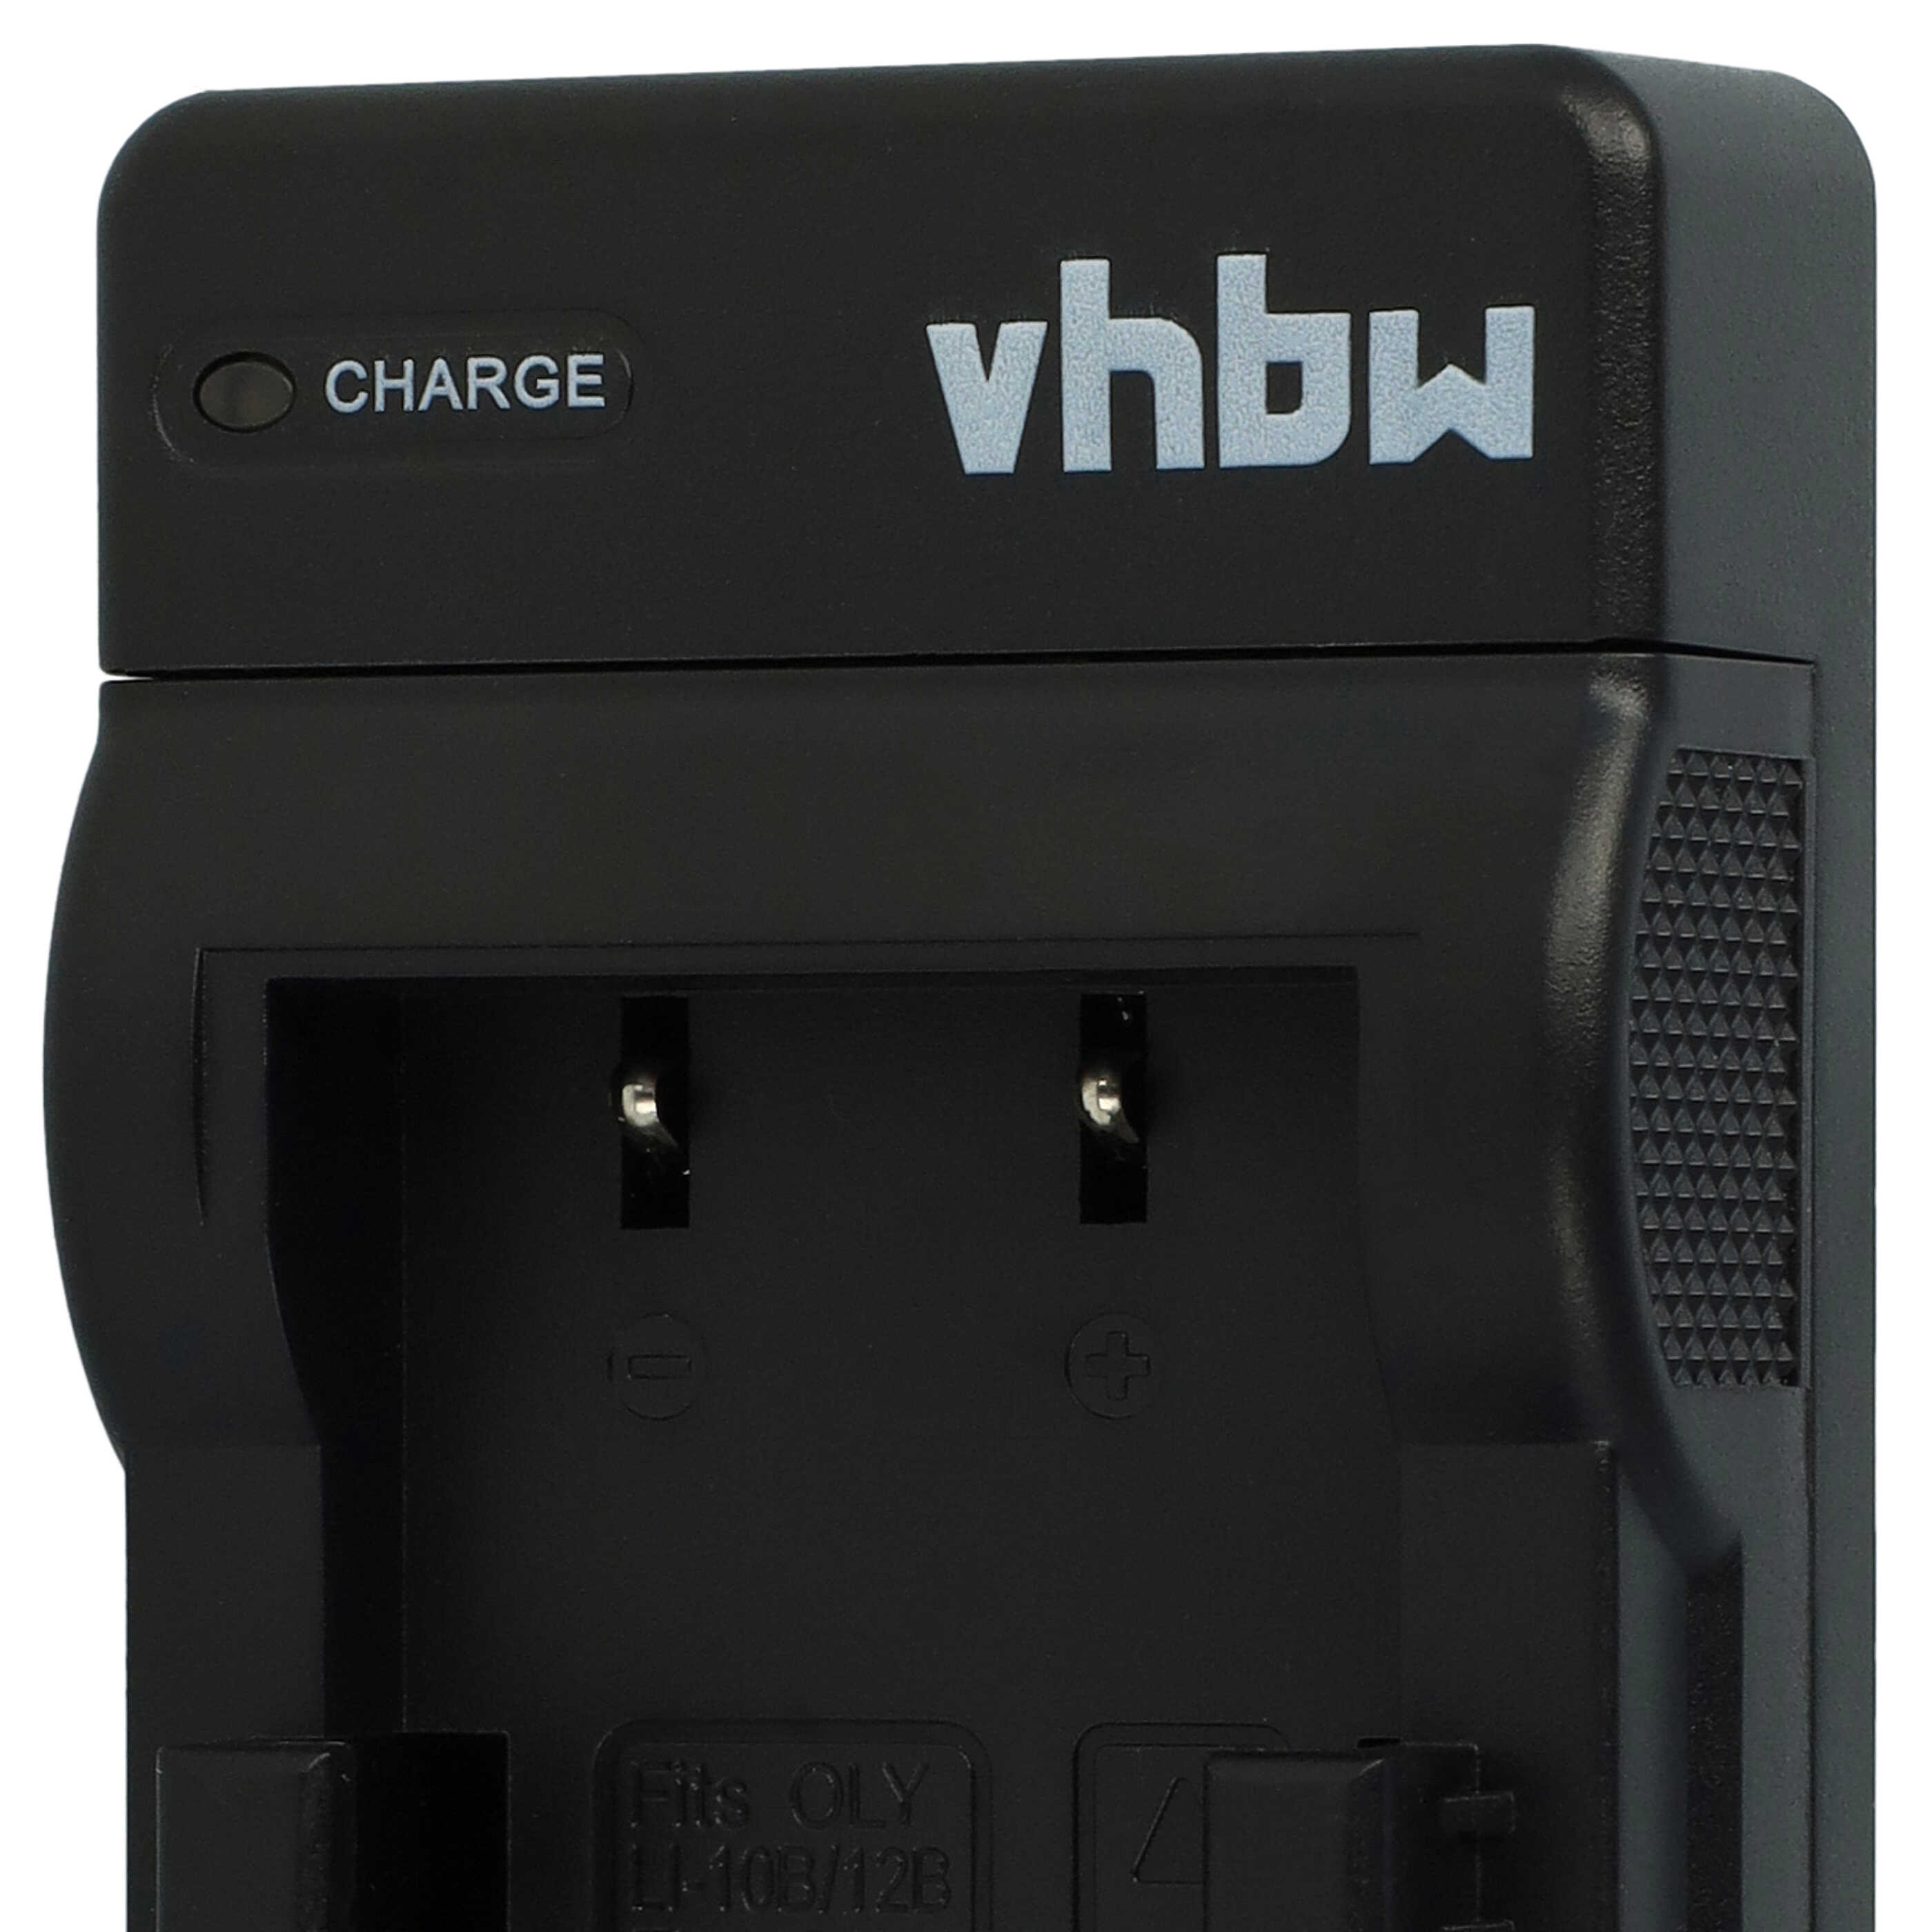 Battery Charger suitable for Sanyo DB-L10 Camera etc. - 0.5 A, 4.2 V